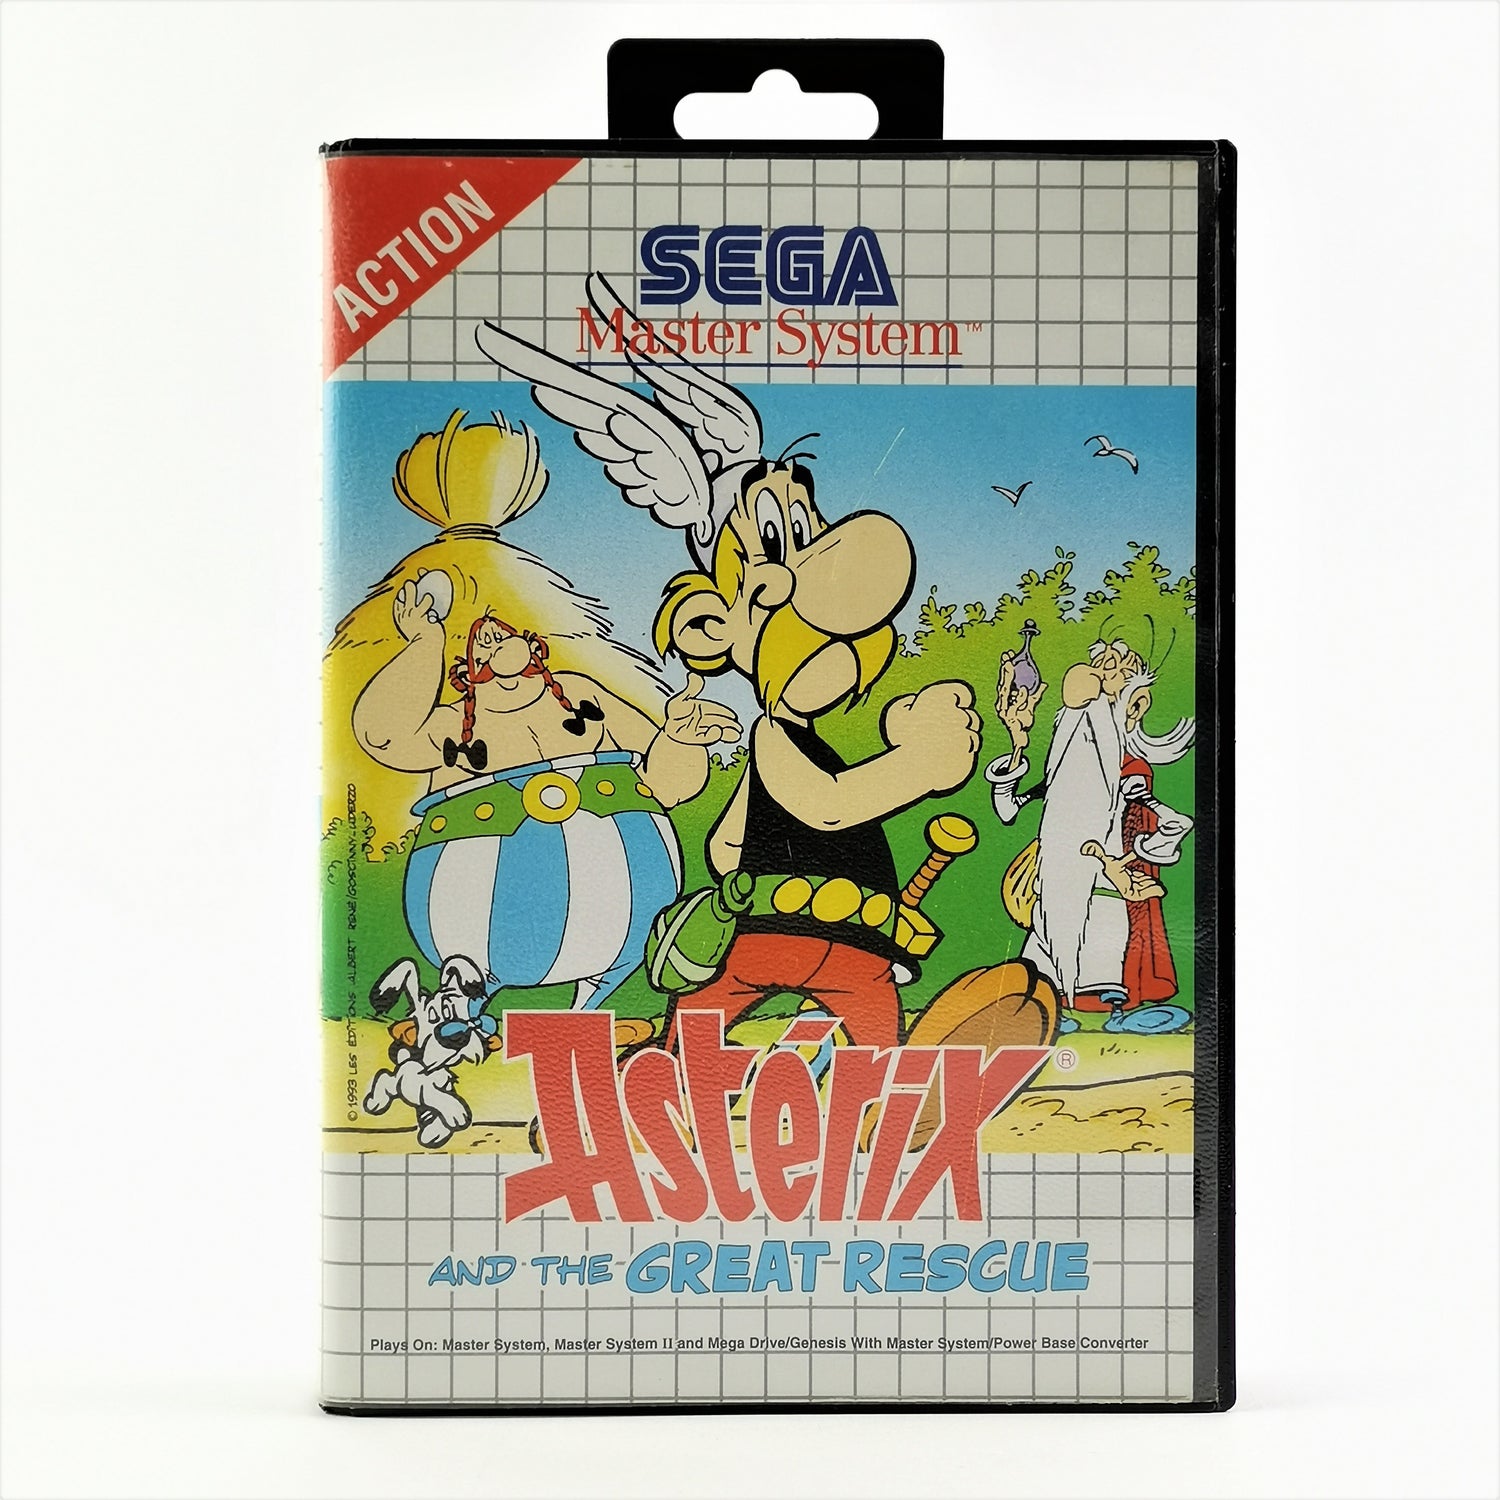 Sega Master System Spiel : Asterix and the Great Rescue - OVP Anleitung PAL [2]